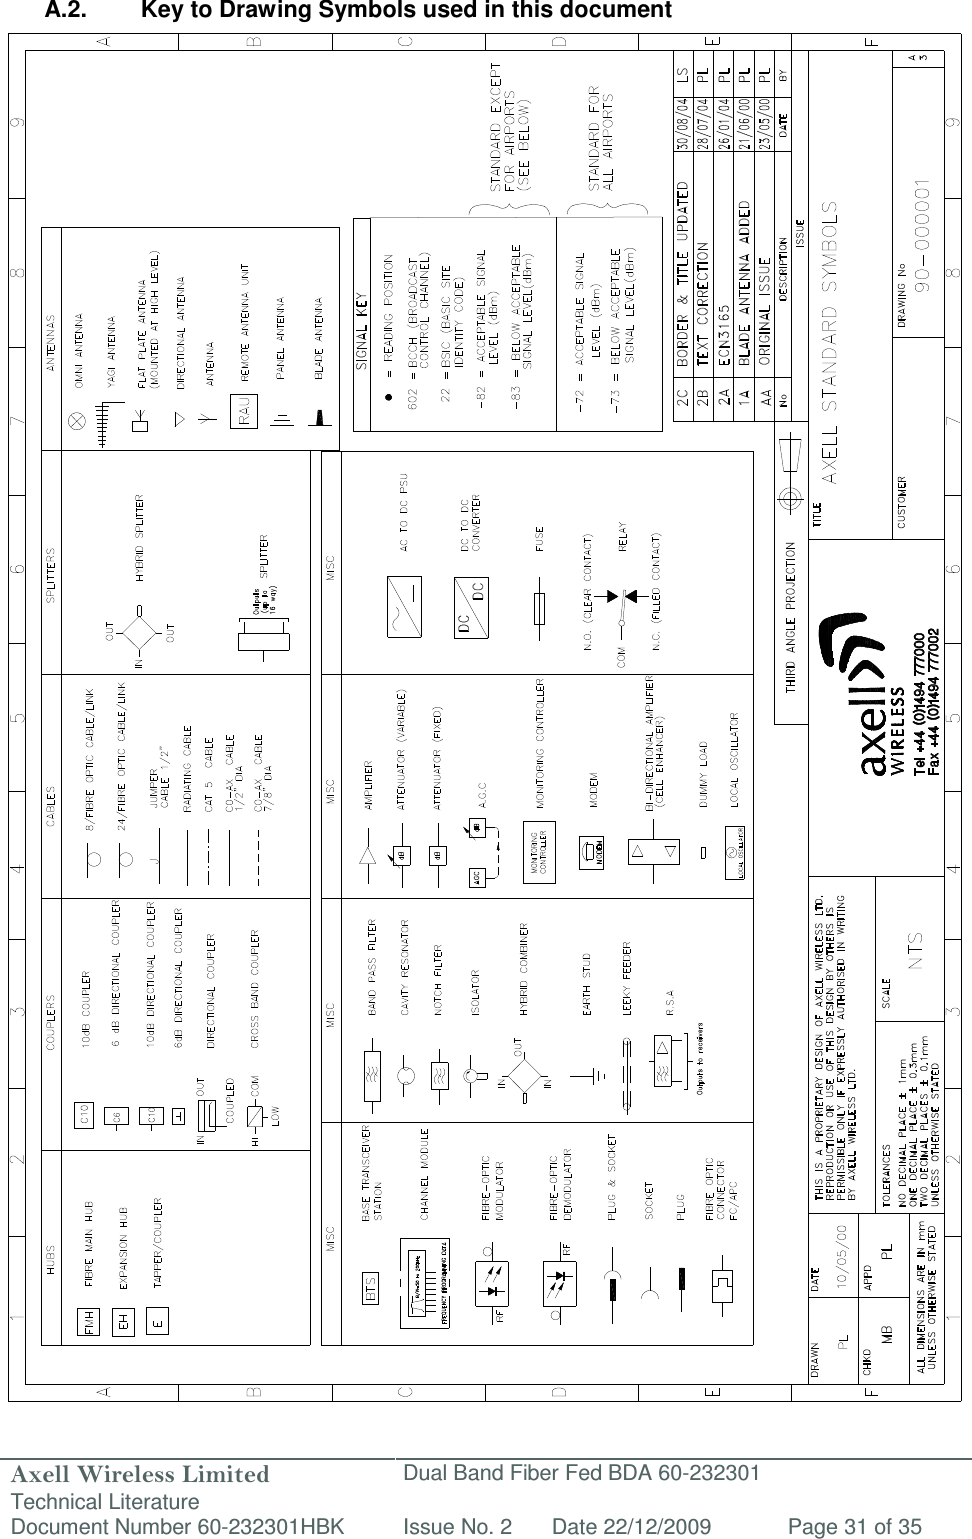 Axell Wireless Limited Technical Literature Dual Band Fiber Fed BDA 60-232301 Document Number 60-232301HBK Issue No. 2 Date 22/12/2009 Page 31 of 35   A.2.  Key to Drawing Symbols used in this document                                                          